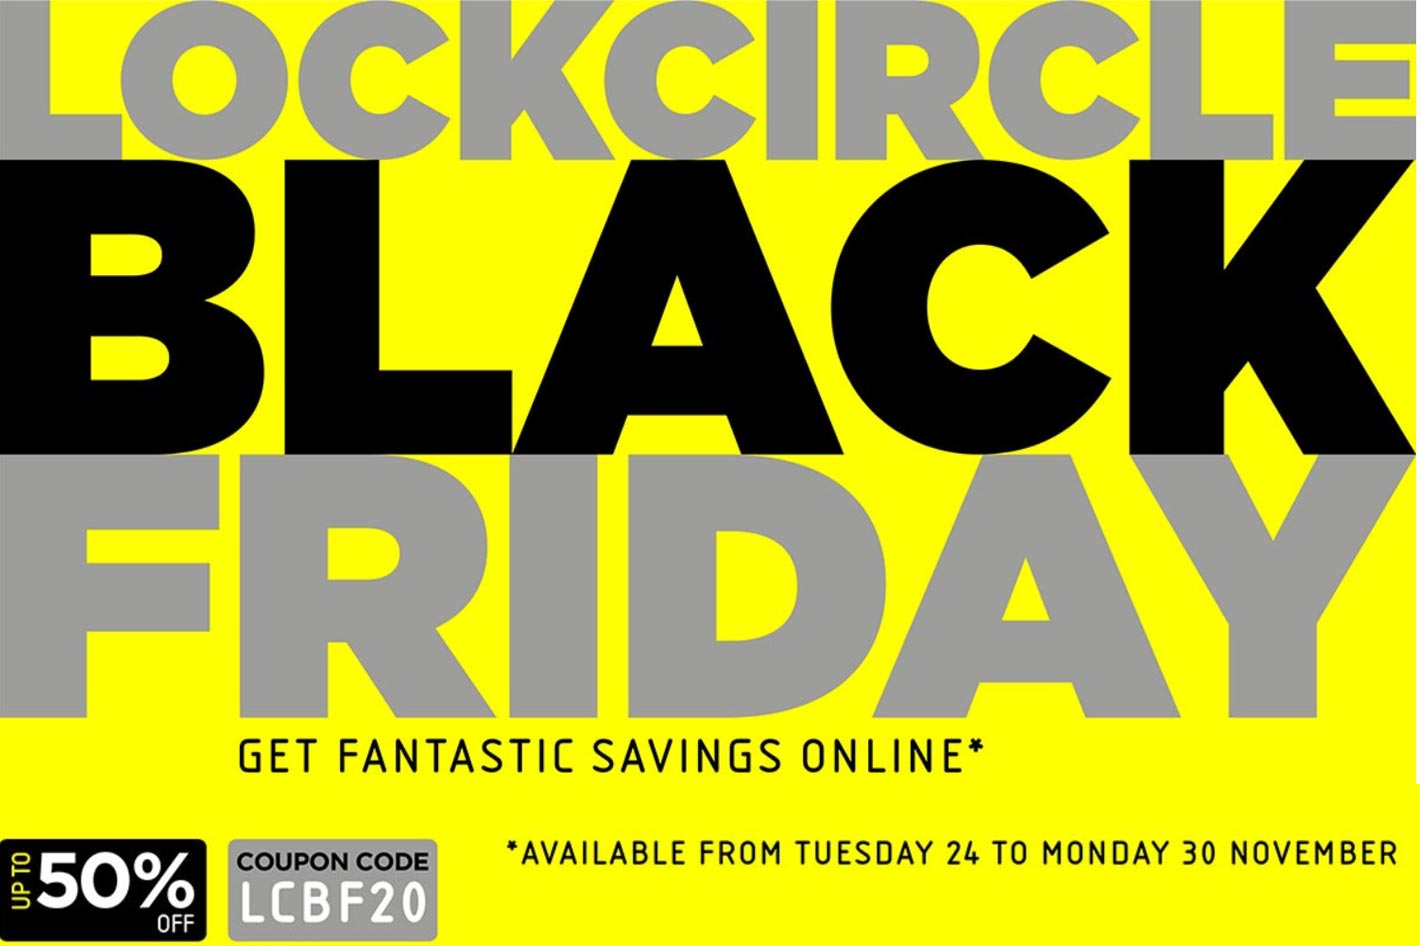 PVC’s Black Friday 2020 best deals: look at these bargains we found!